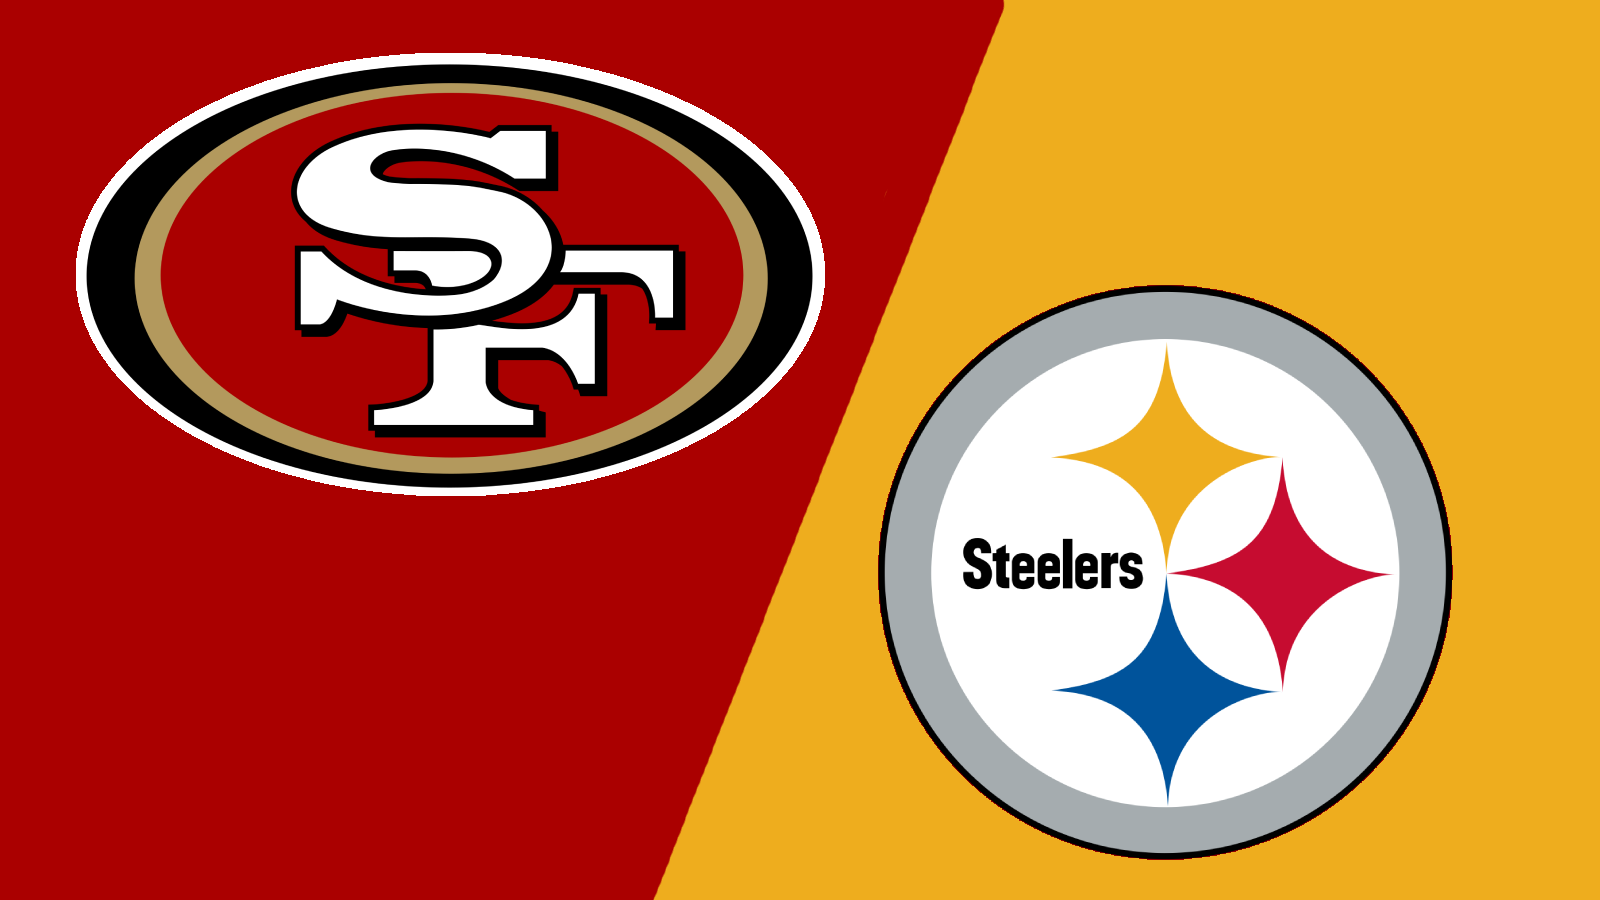 49ers vs Steelers live stream: How to watch NFL Week 1 from anywhere